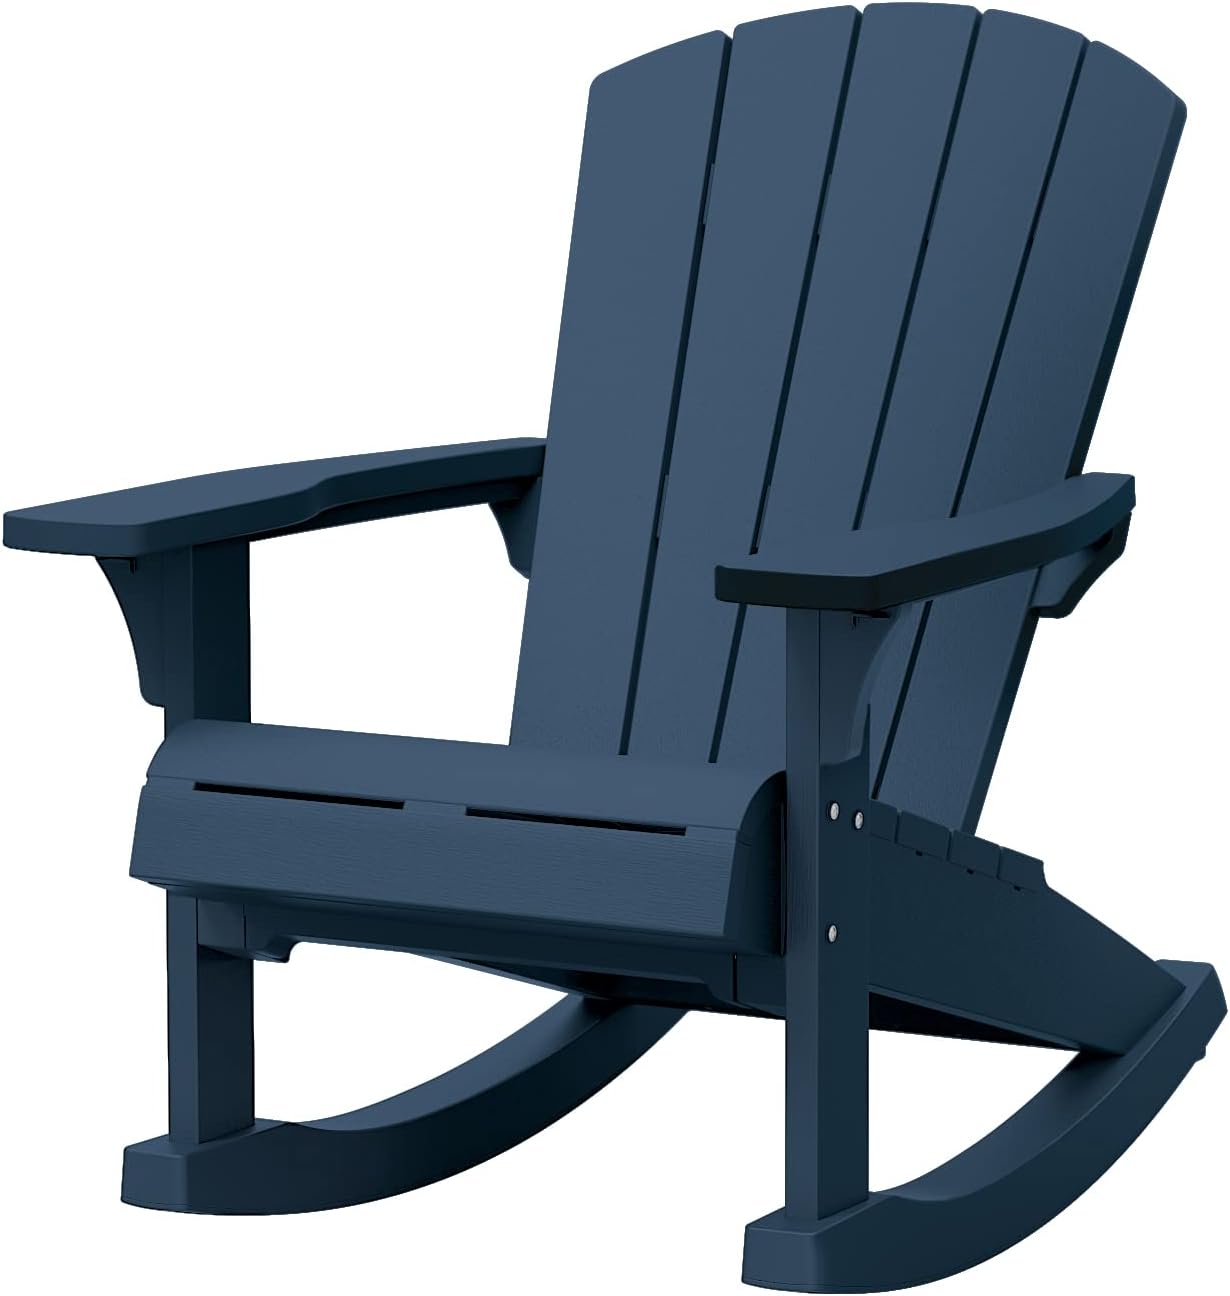 Keter Adirondack Rocker Resin Outdoor Furniture Patio Chair -Perfect for Porch, Pool, and Fire Pit Seating, Midnight Blue